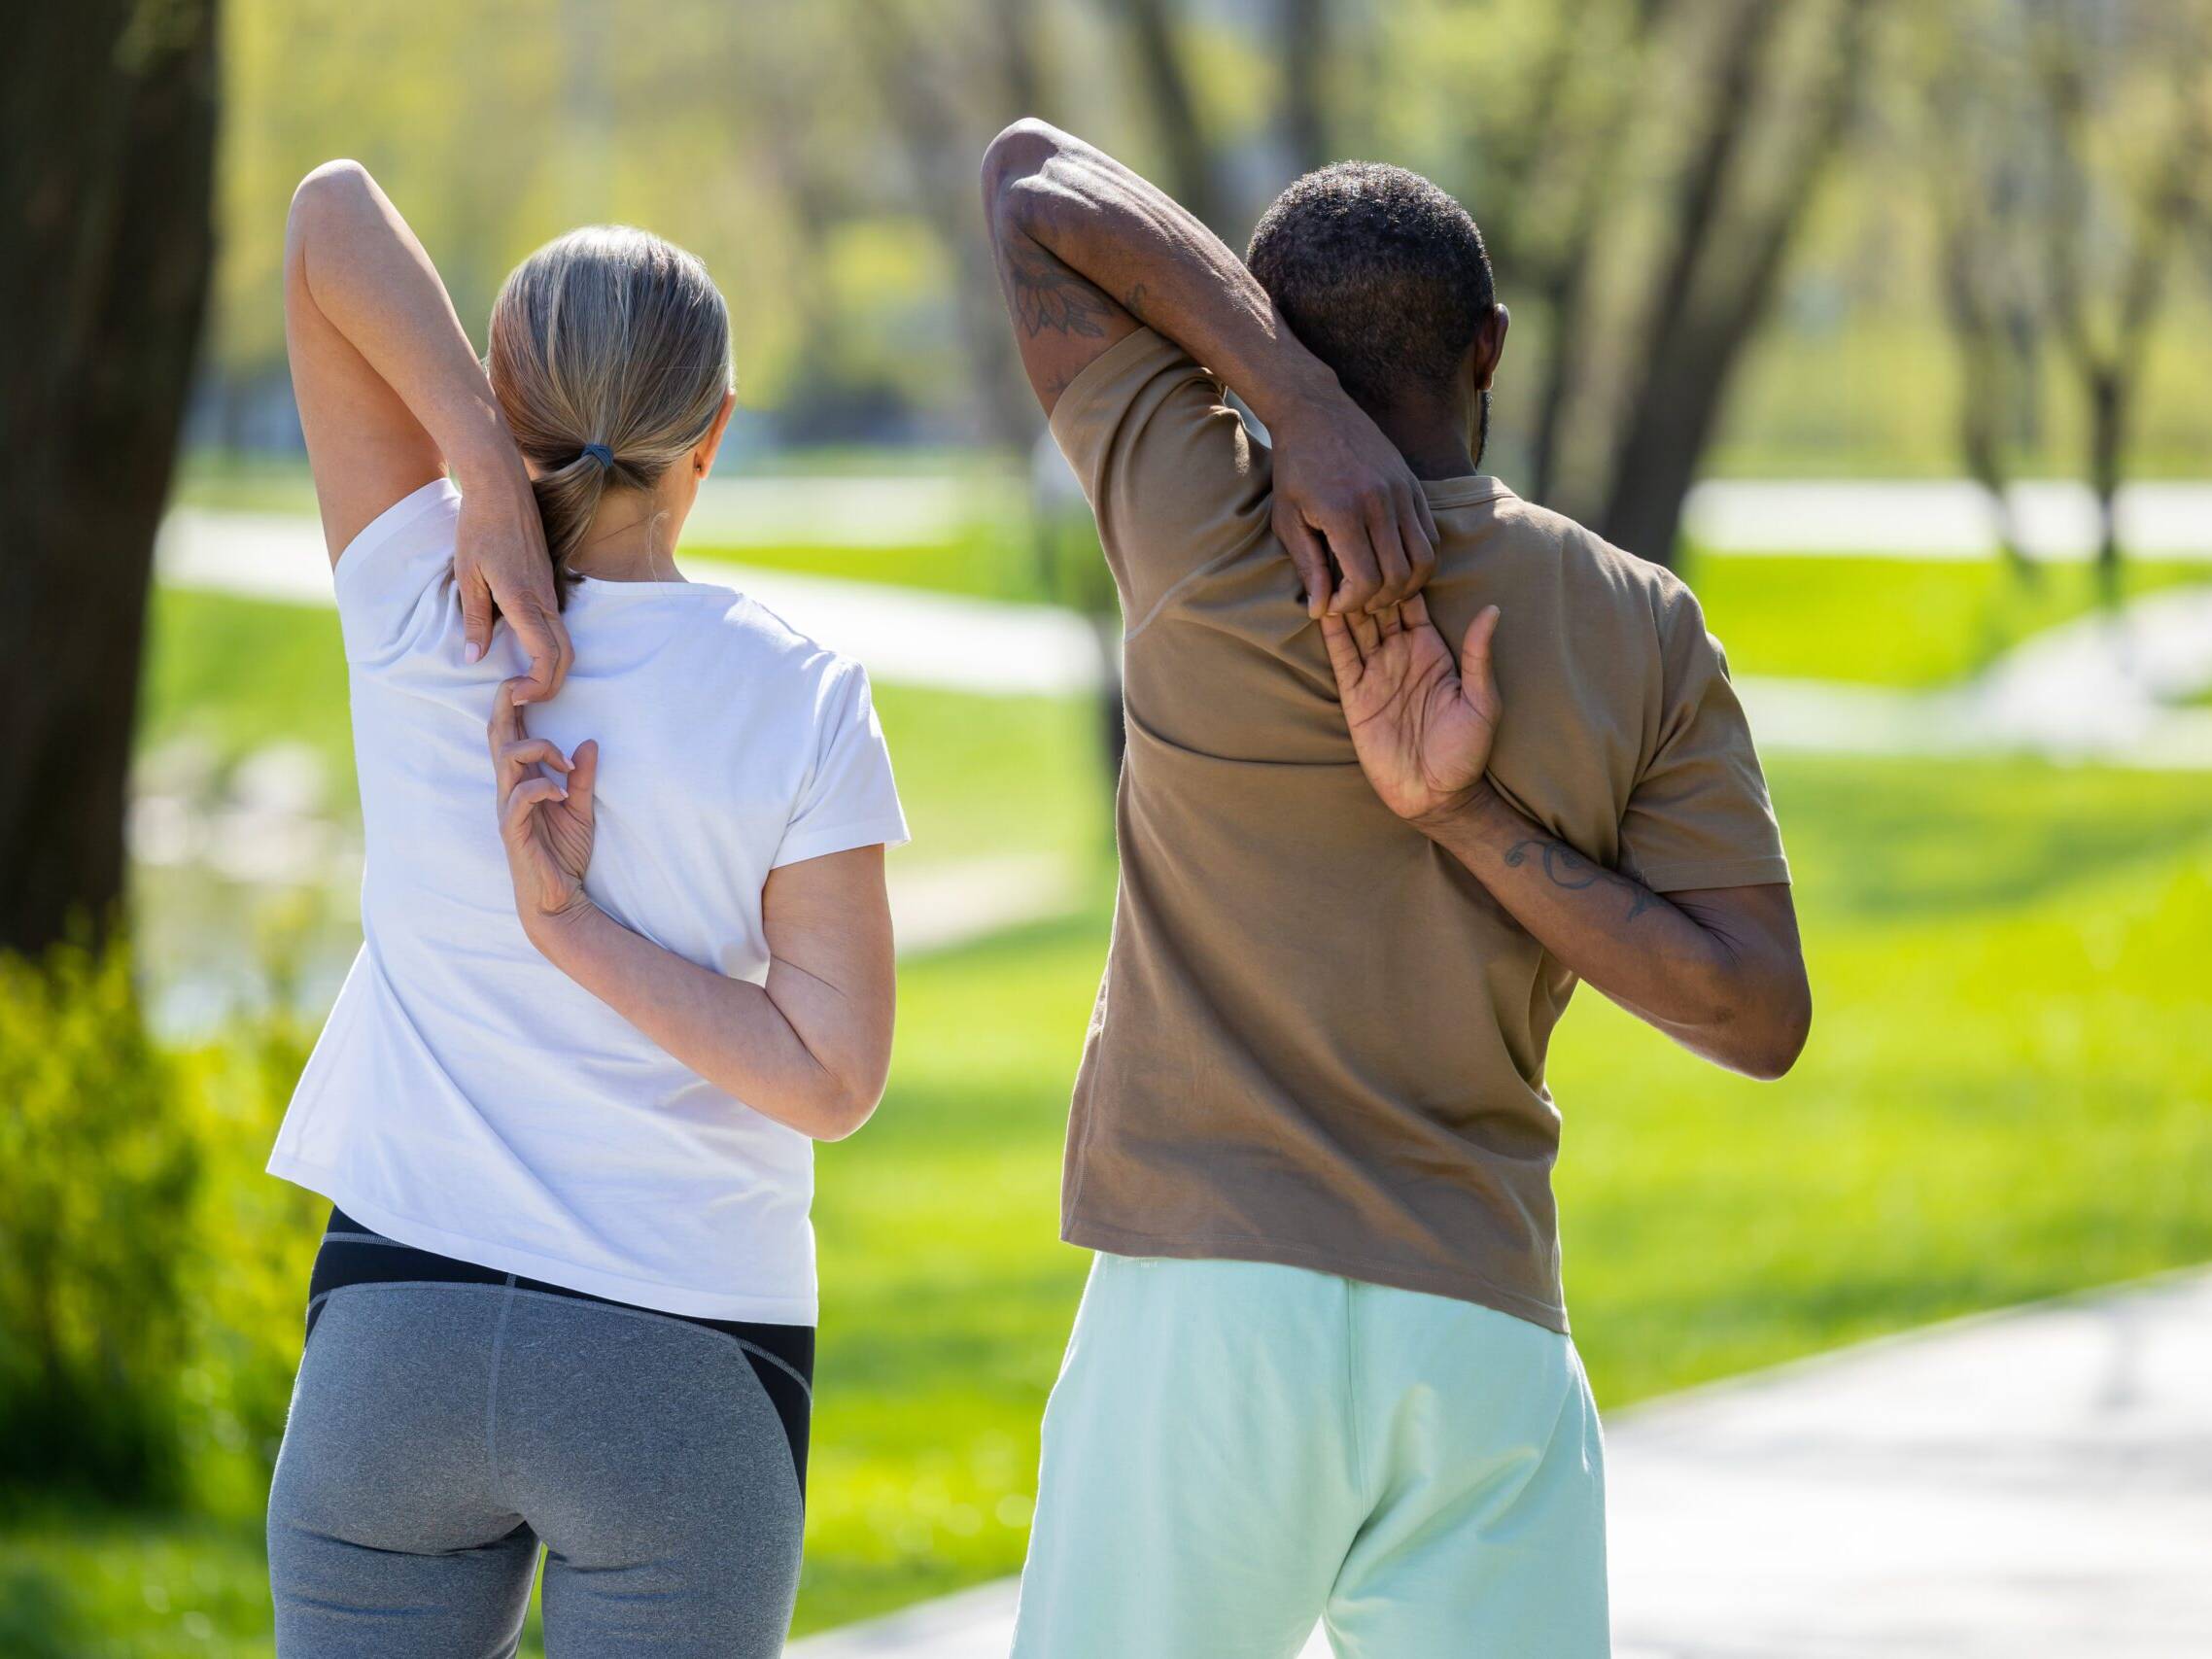 Couple exercising in the park and looking energetic